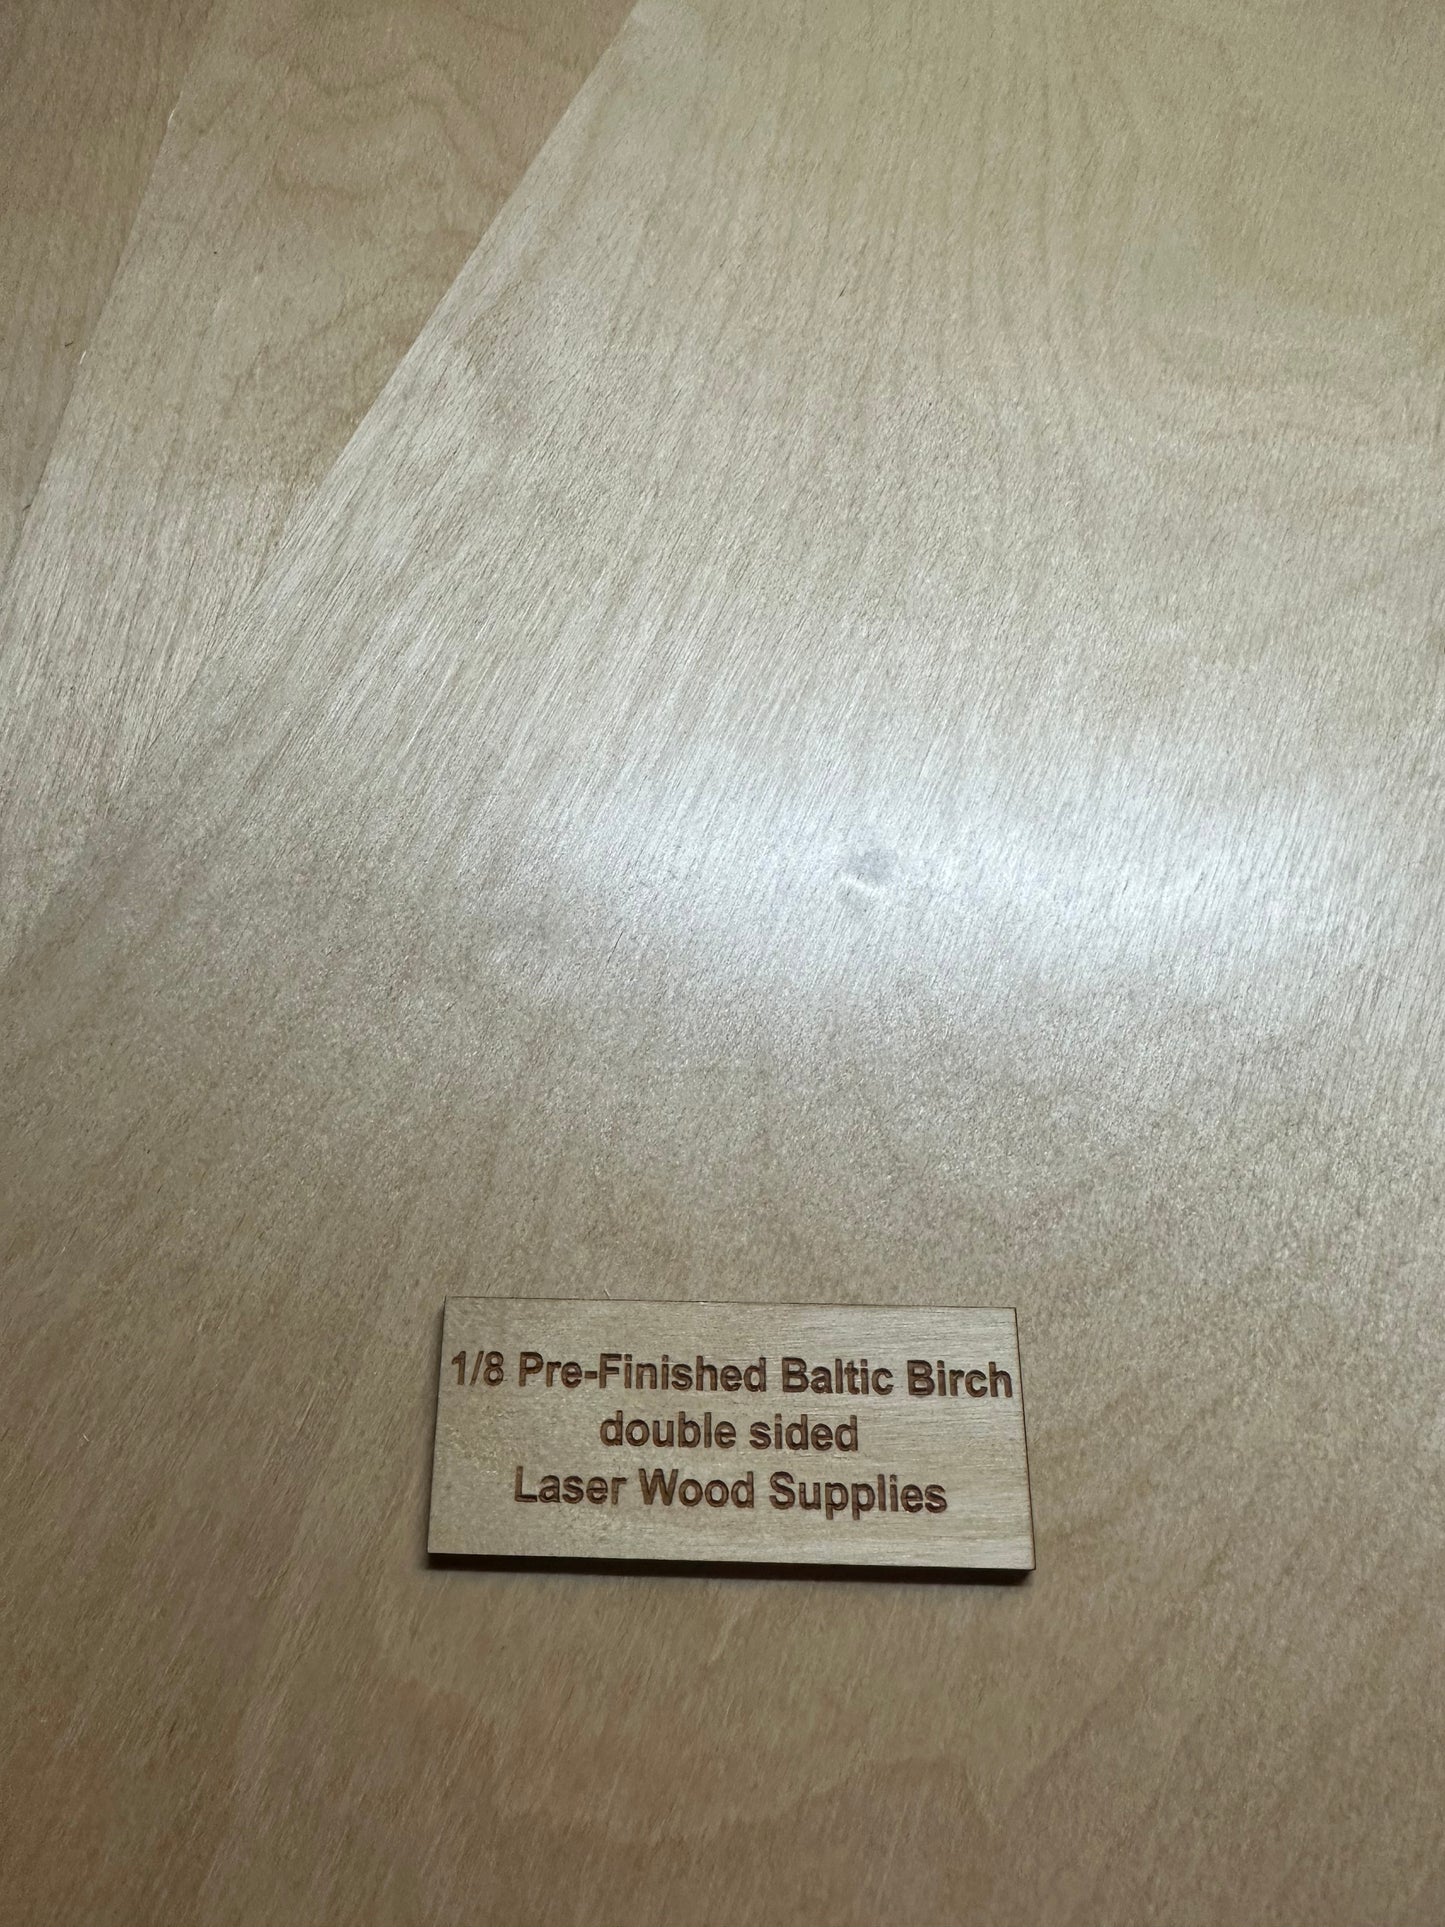 45 SHEETS - PRE-FINISHED 3.5mm Baltic Birch Perfect for lasers/Glowforge BULK BOX - FREE UPS SHIPPING